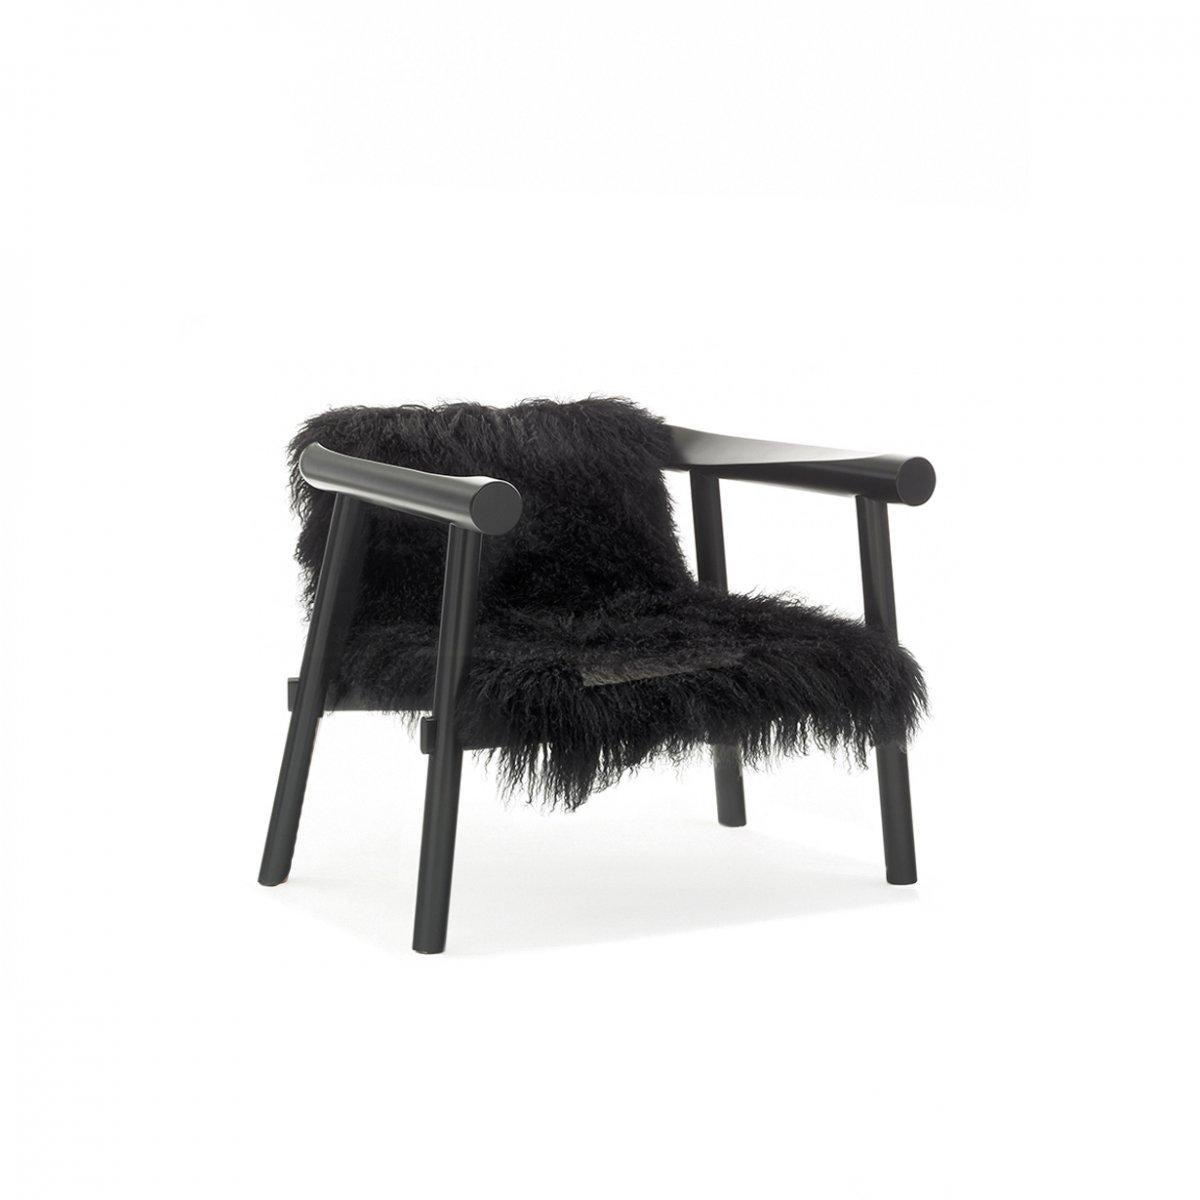 Black Goatskin Altay armchair by Patricia Urquiola
Materials: Black lacquered solid beech structure. Seat covered with black Mongolian goatskin.
Technique: Lacquered and stained wood. Upholstered in natural skin. 
Dimensions: D 73 x W 73 x H 63